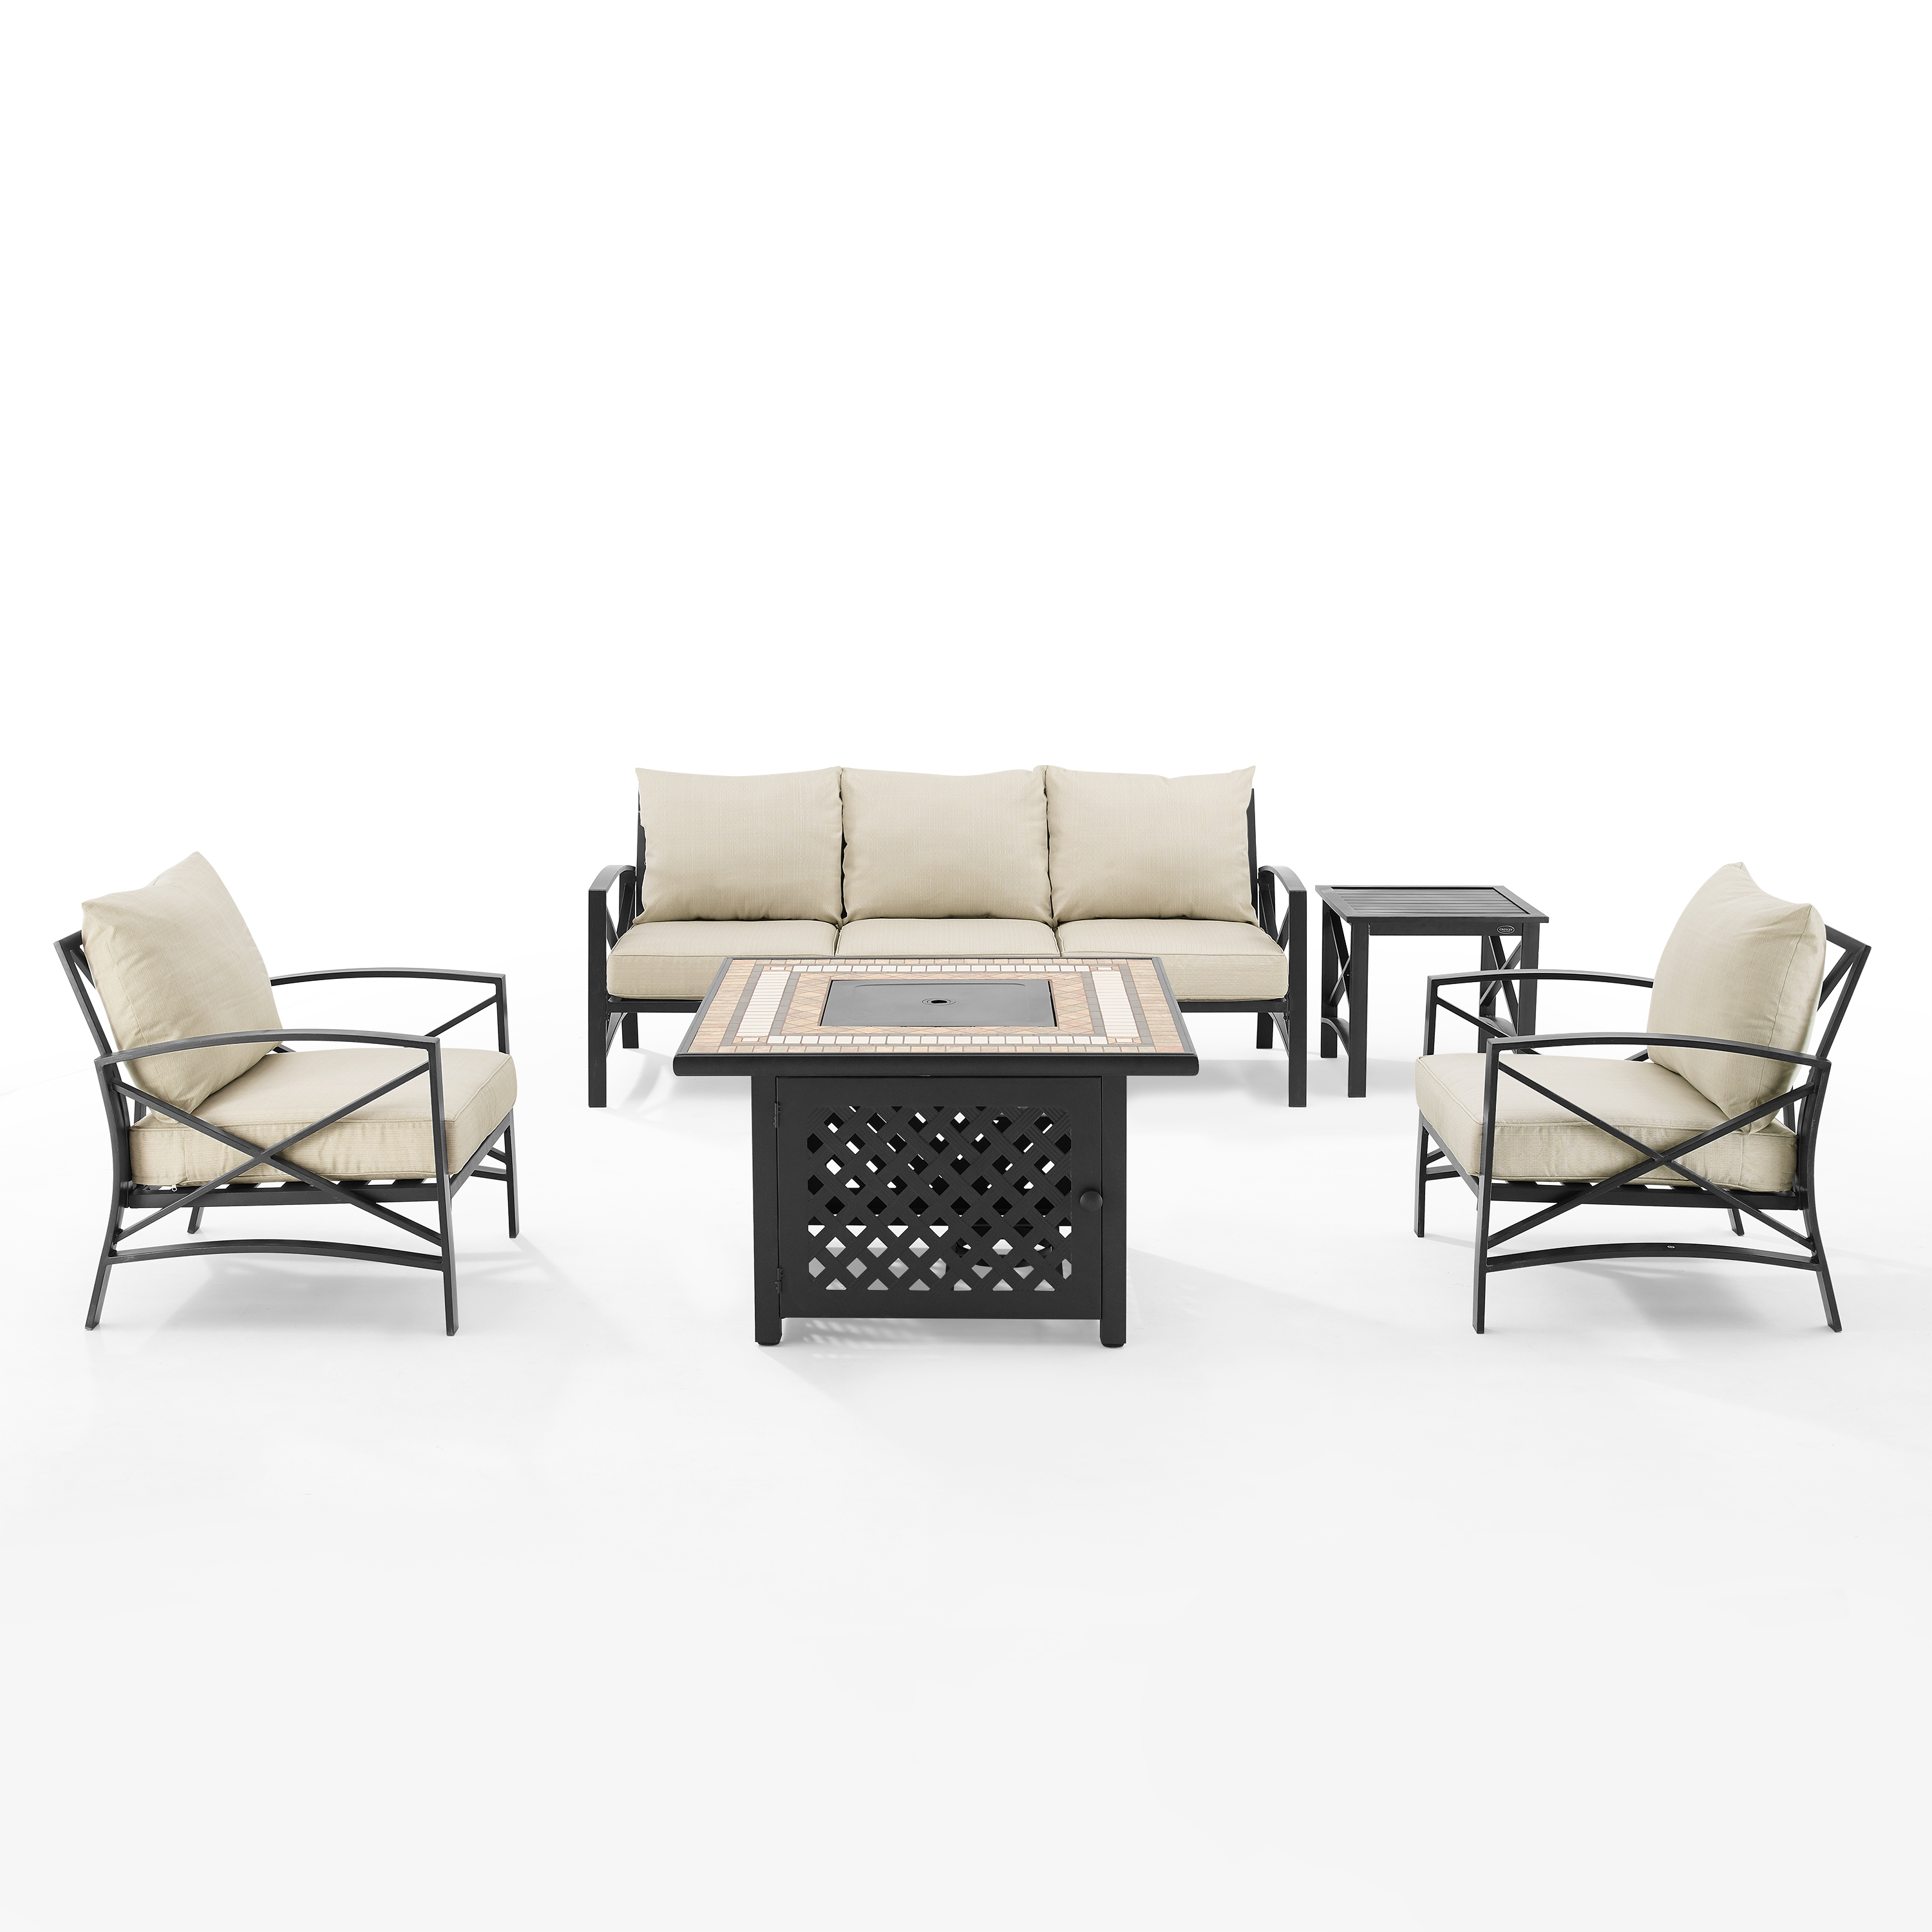 Crosley Furniture Kaplan Oil Rubbed Bronze/Oatmeal 5 Piece Outdoor Sofa Set with Fire Table - image 1 of 13